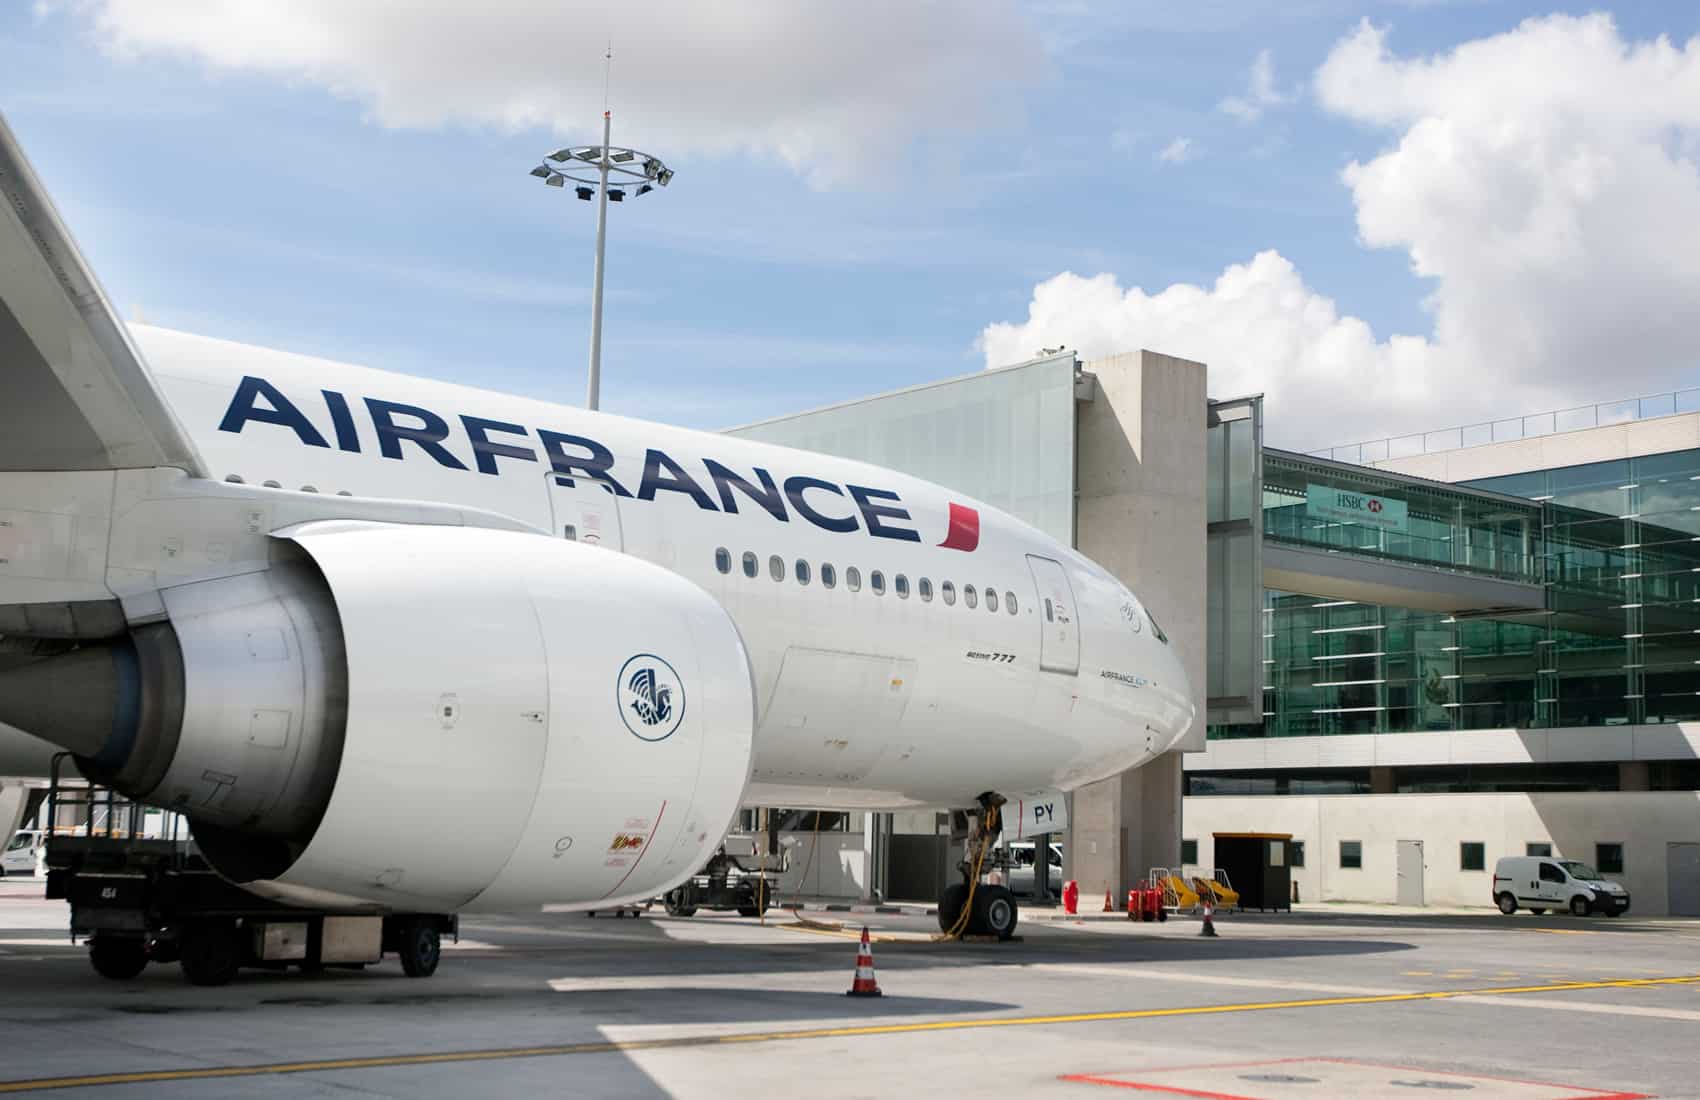 Air France flights to Costa Rica